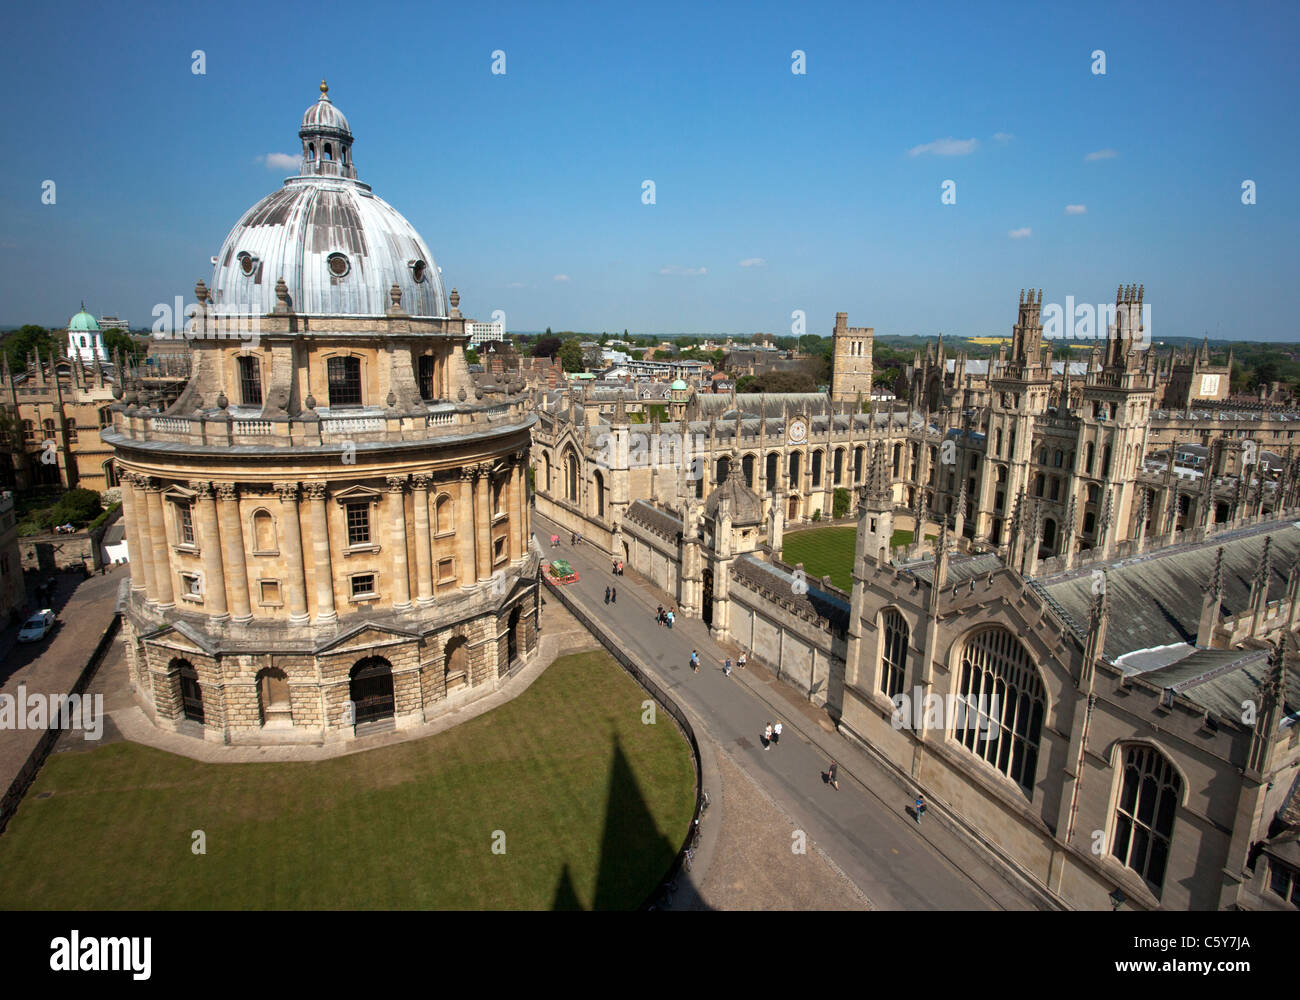 Radcliffe Camera and All Souls college in Oxford, UK. Stock Photo